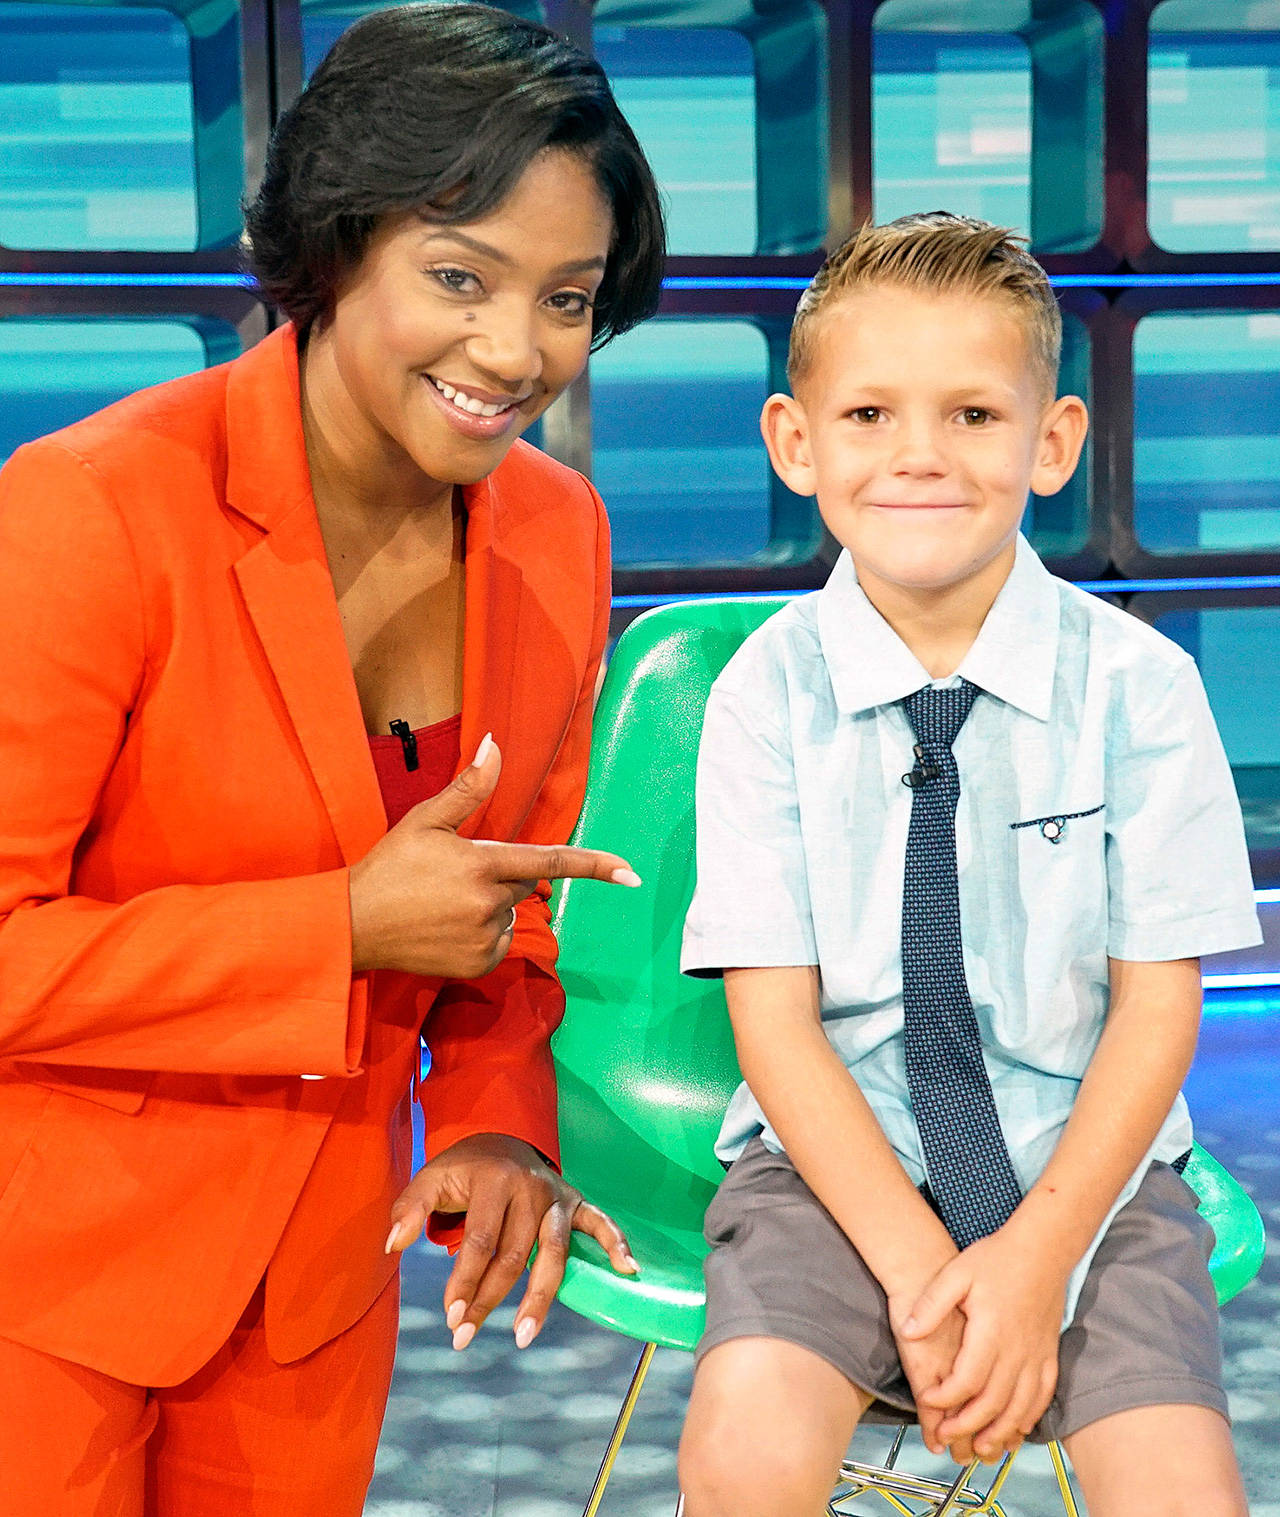 Tiffany Haddish hosts Blake on ABC’s comedy show “Kids Say the Darndest Things.” (ABC)